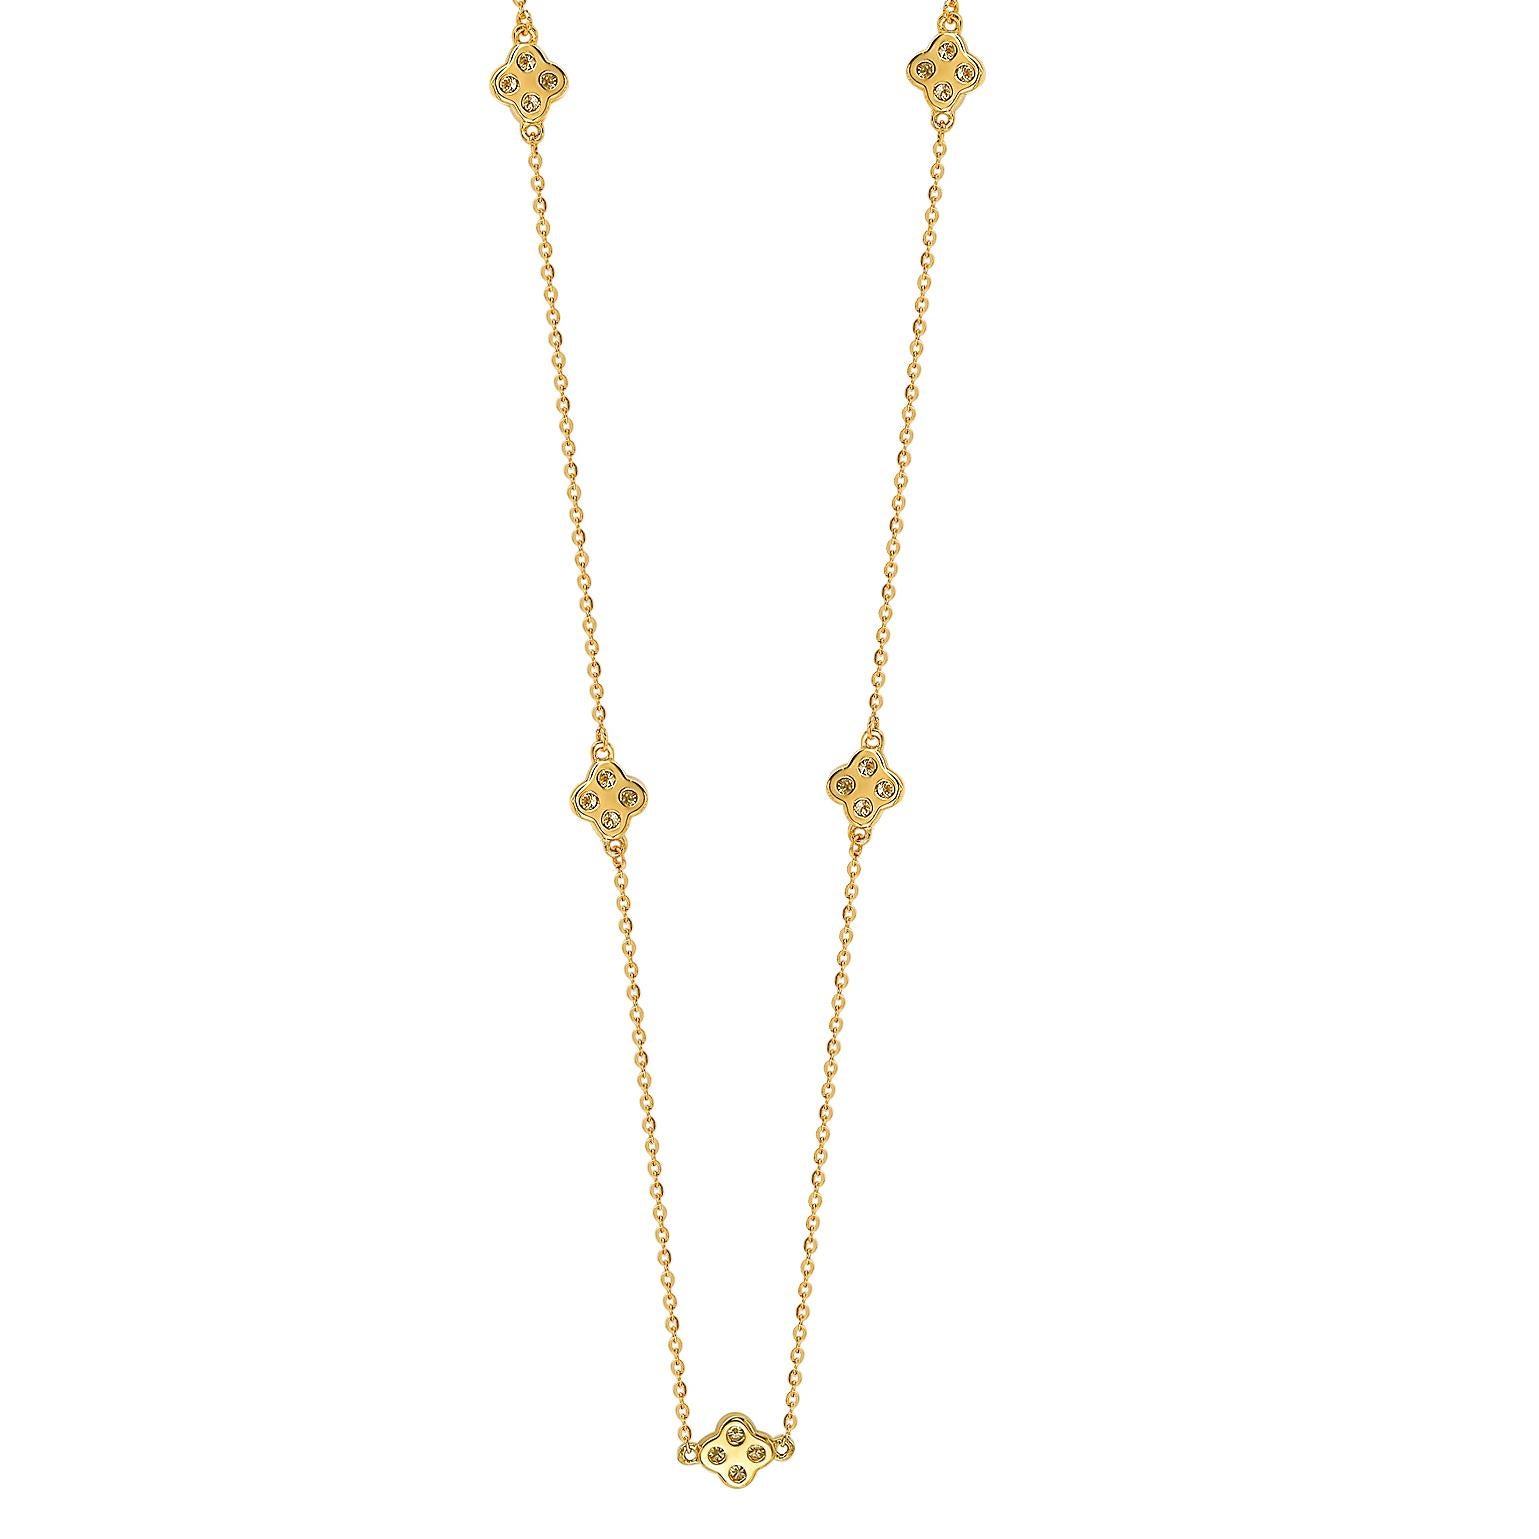 This unique Suzy Levian diamond clover by the yard necklace displays round-cut diamonds on 14 karat yellow gold setting. This gorgeous necklace contains 20, 1.75 mm white round cut diamonds totaling .40 cttw. The necklace has 7 clovers, each clover